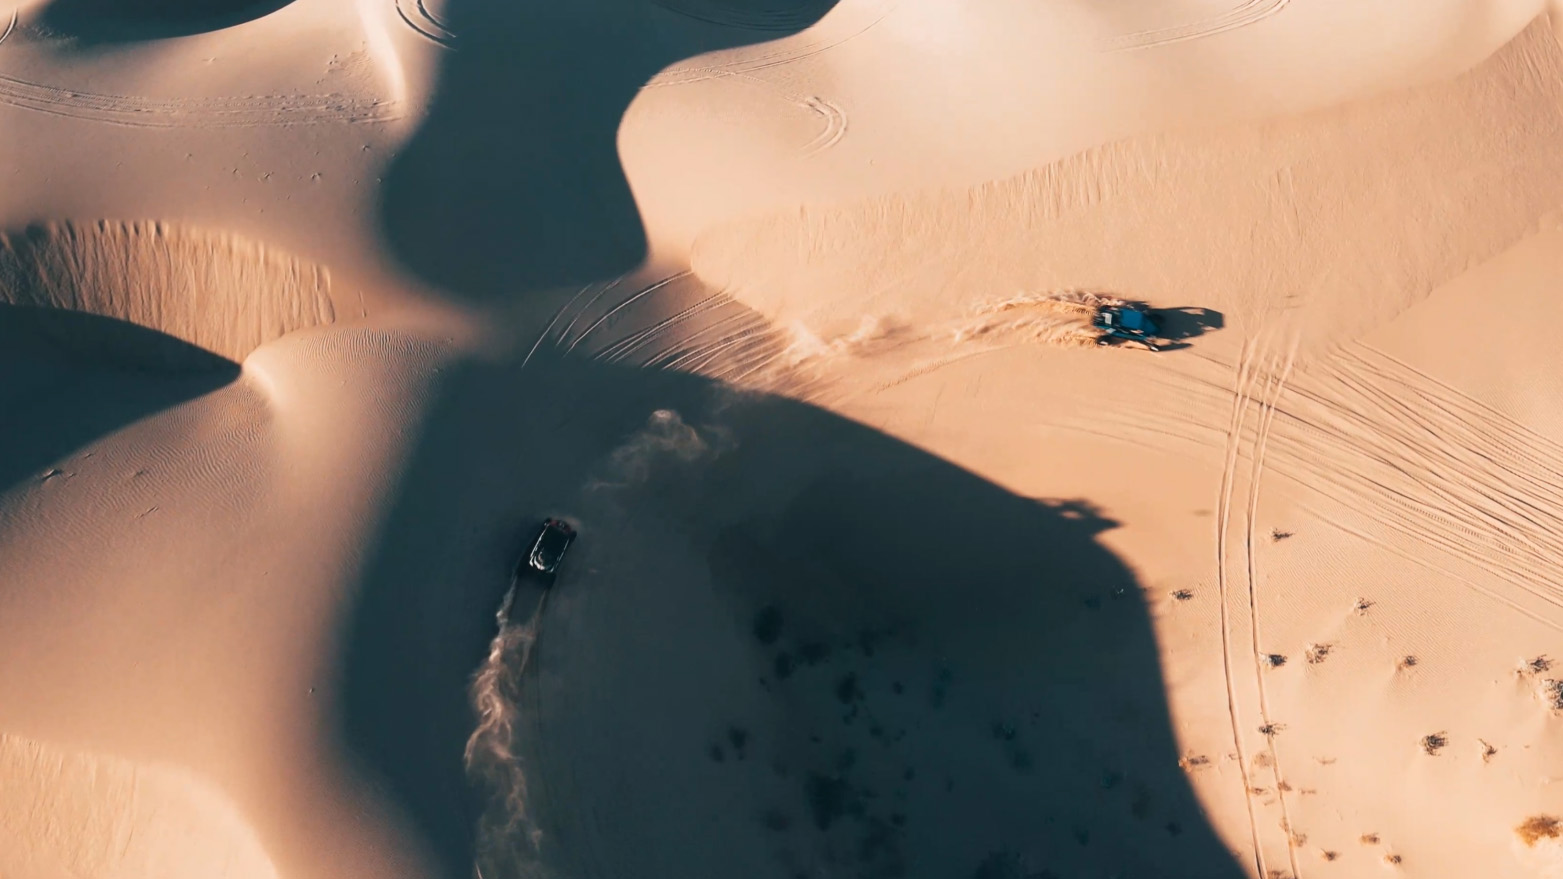 drone footage of ATVs riding in sand dunes